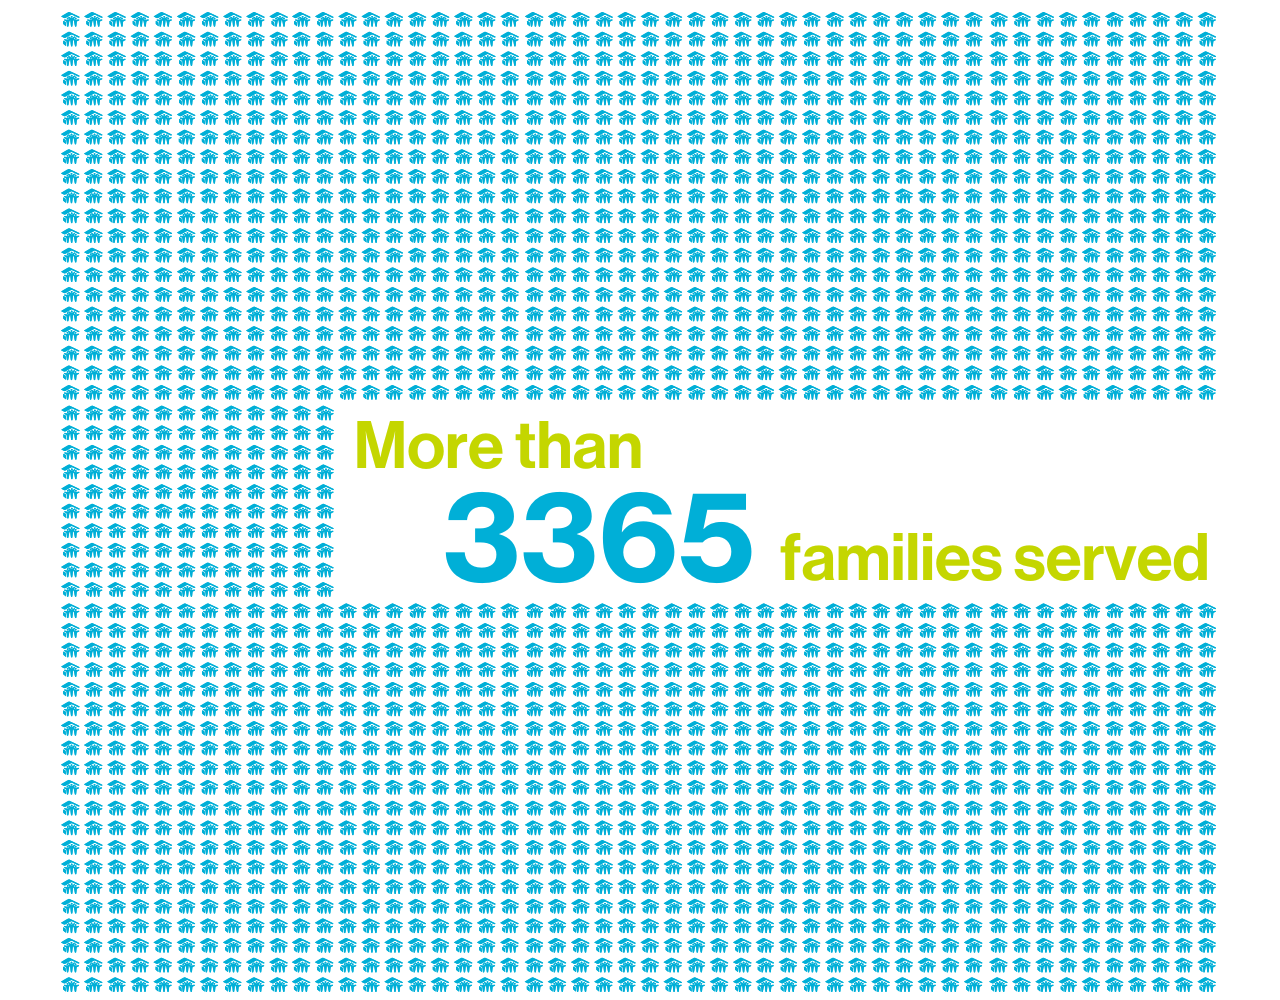 2023 families served